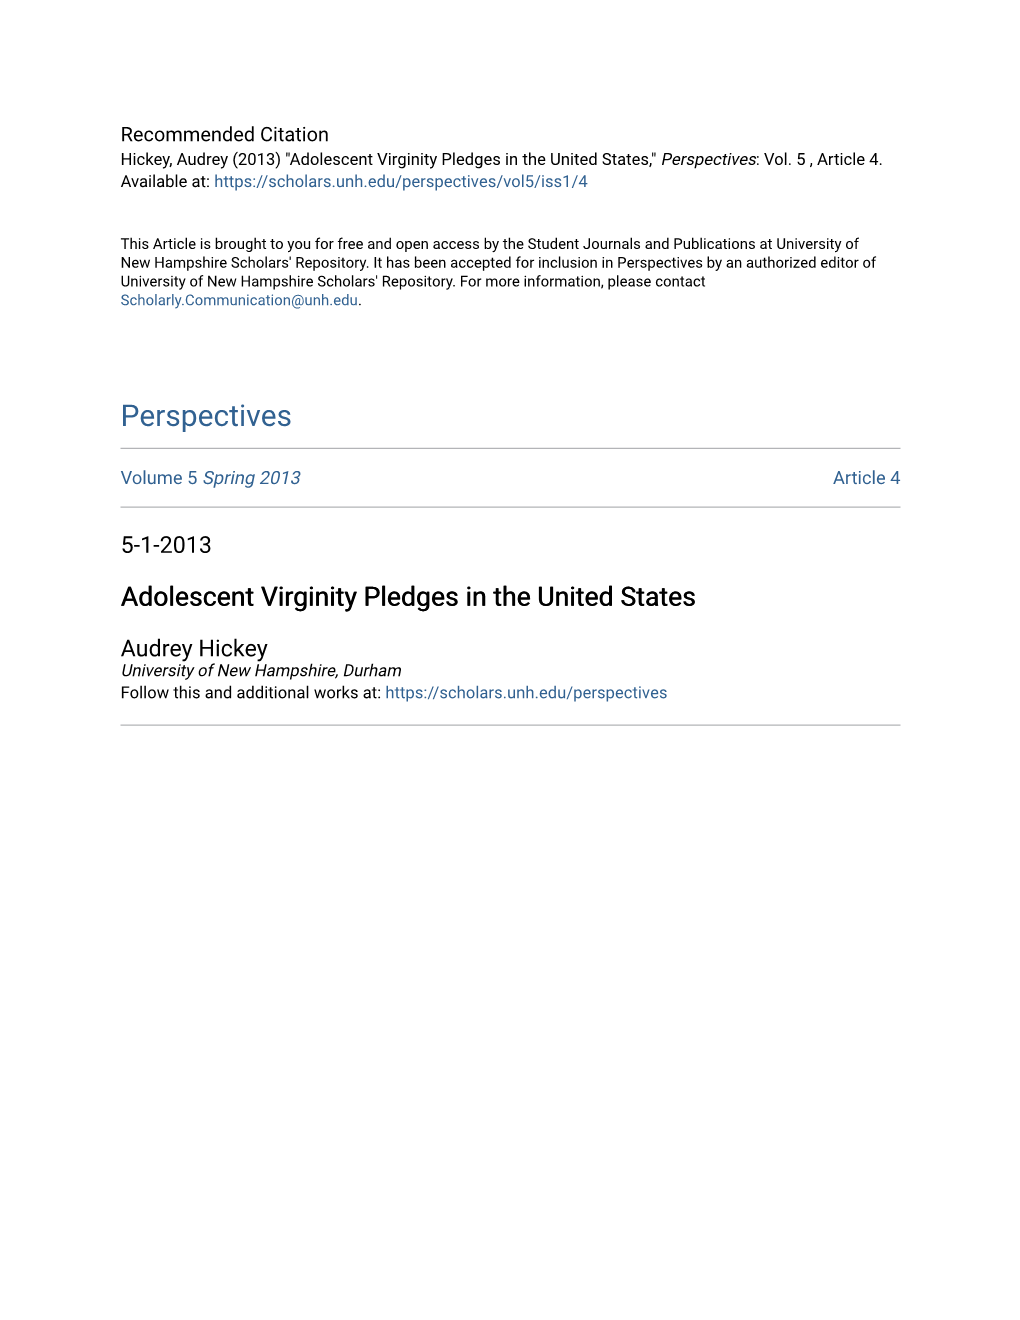 Adolescent Virginity Pledges in the United States," Perspectives: Vol